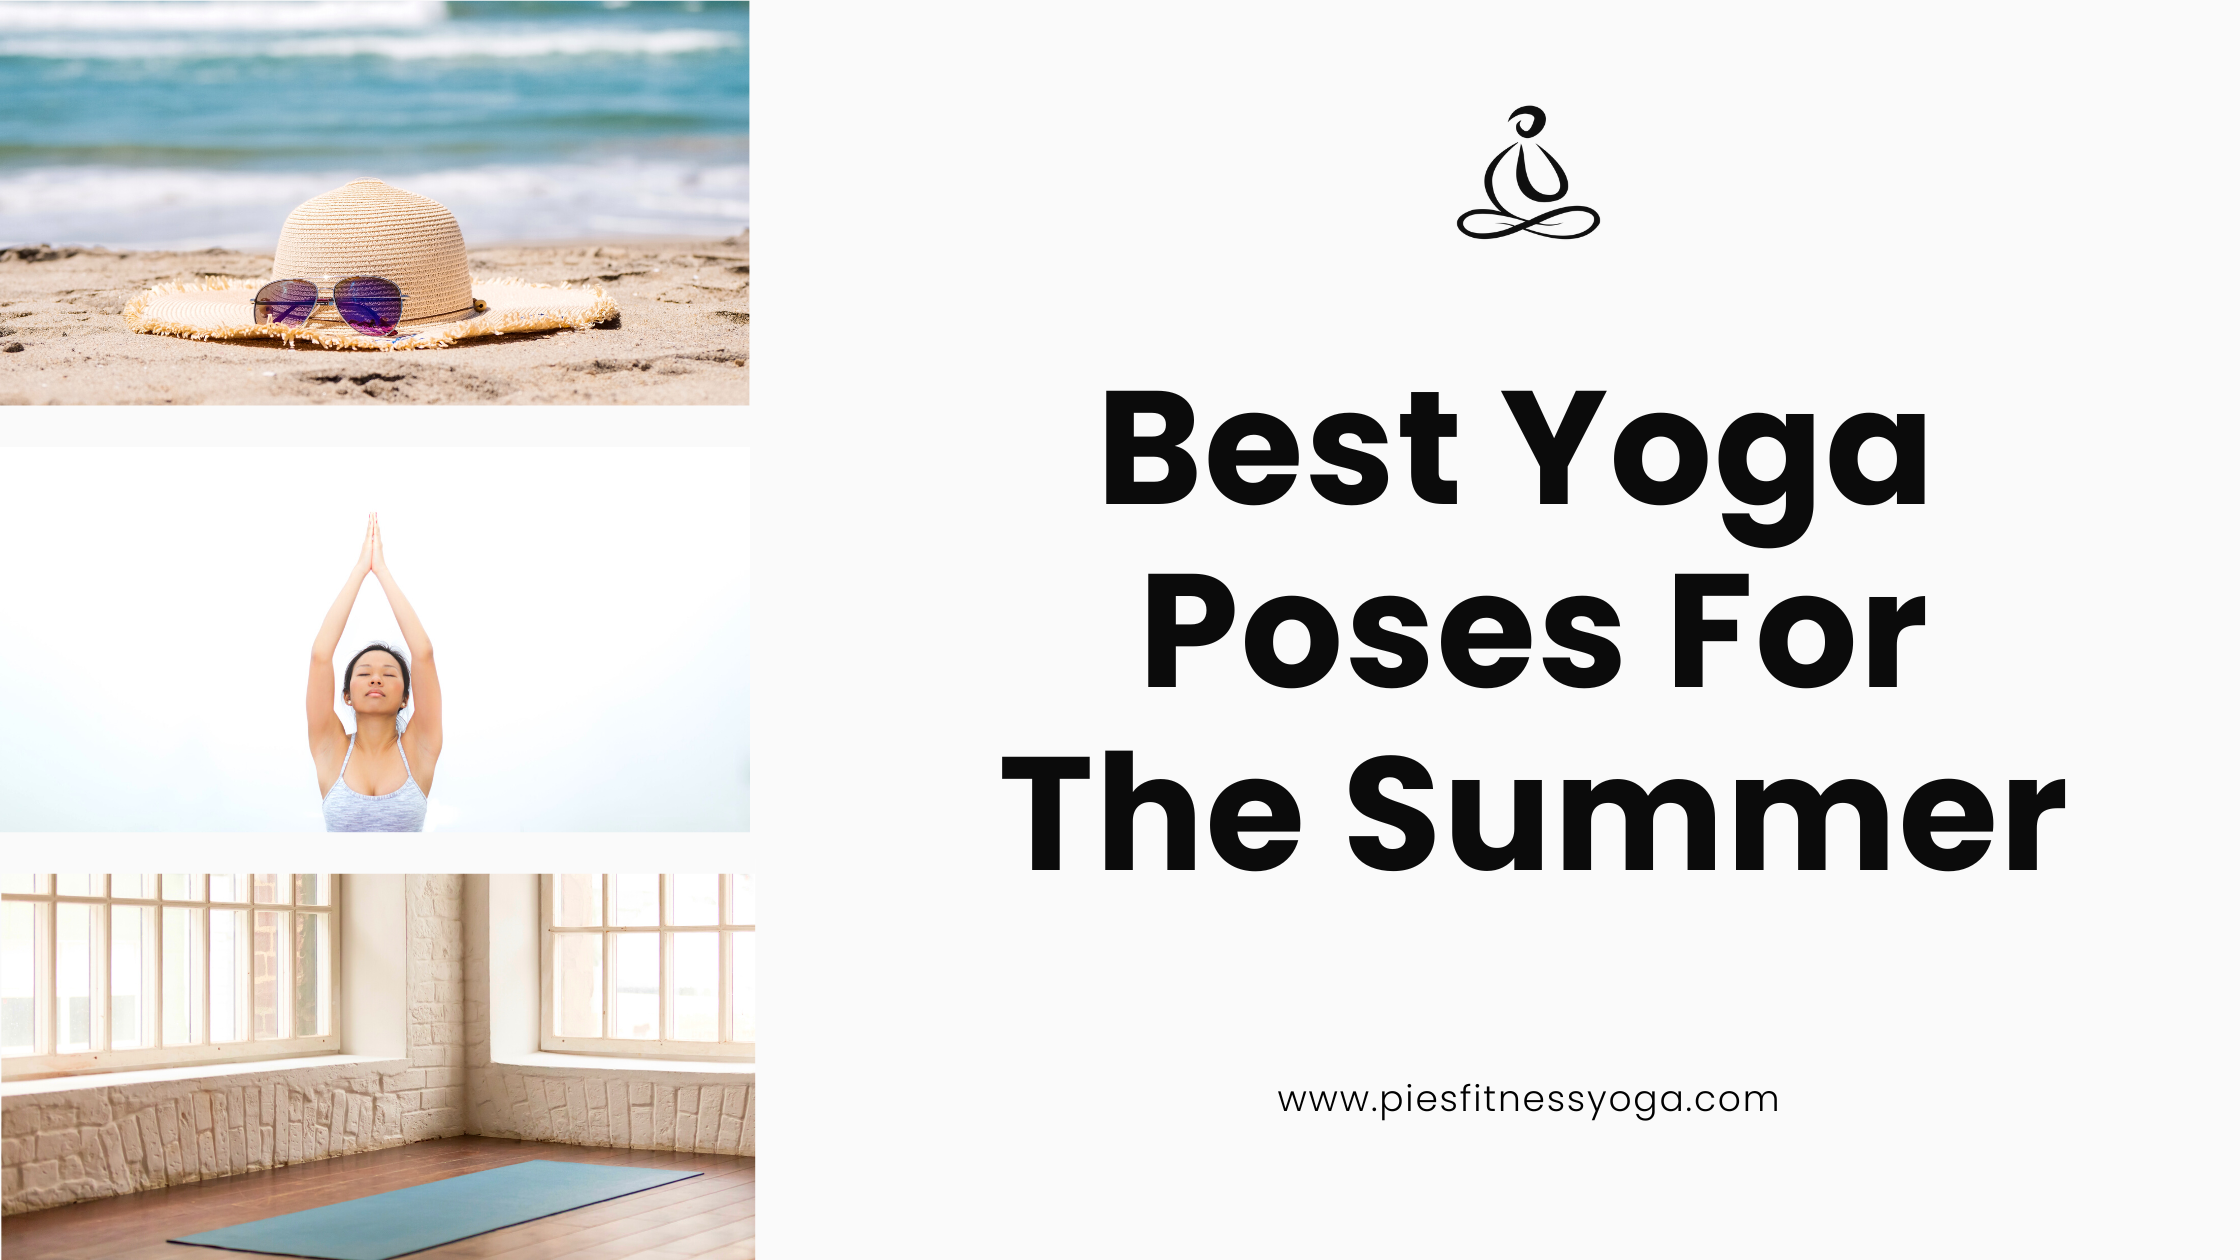 Best yoga poses for the summer